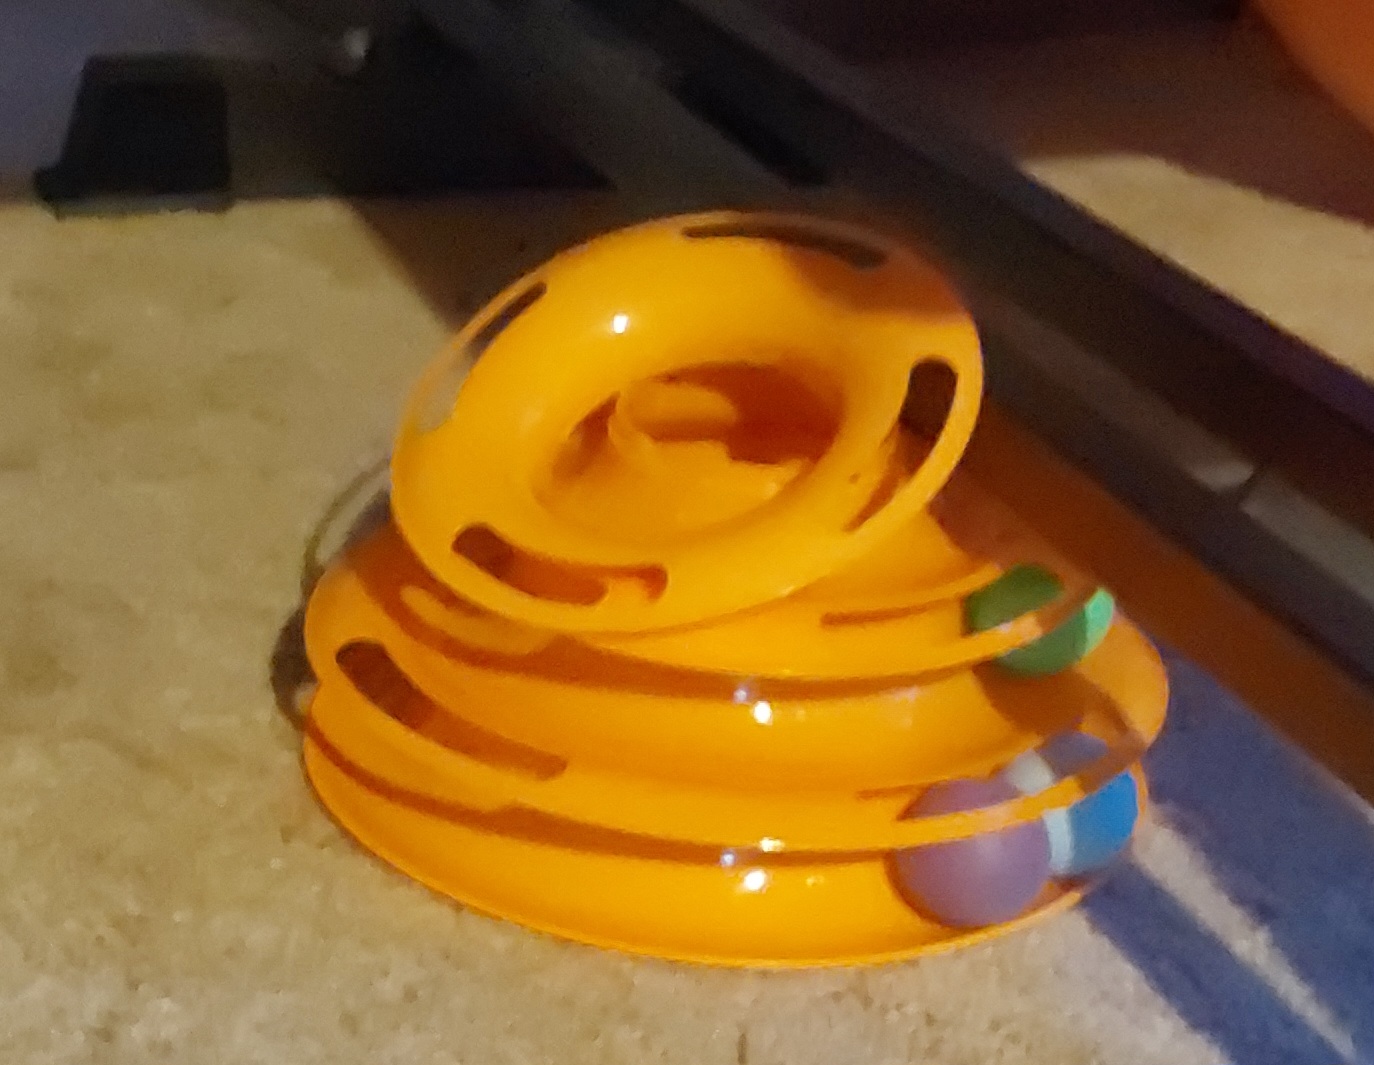 Image of cat toy with three rings holding balls in a channel.  The top ring has been pulled off allowing the ball to be removed